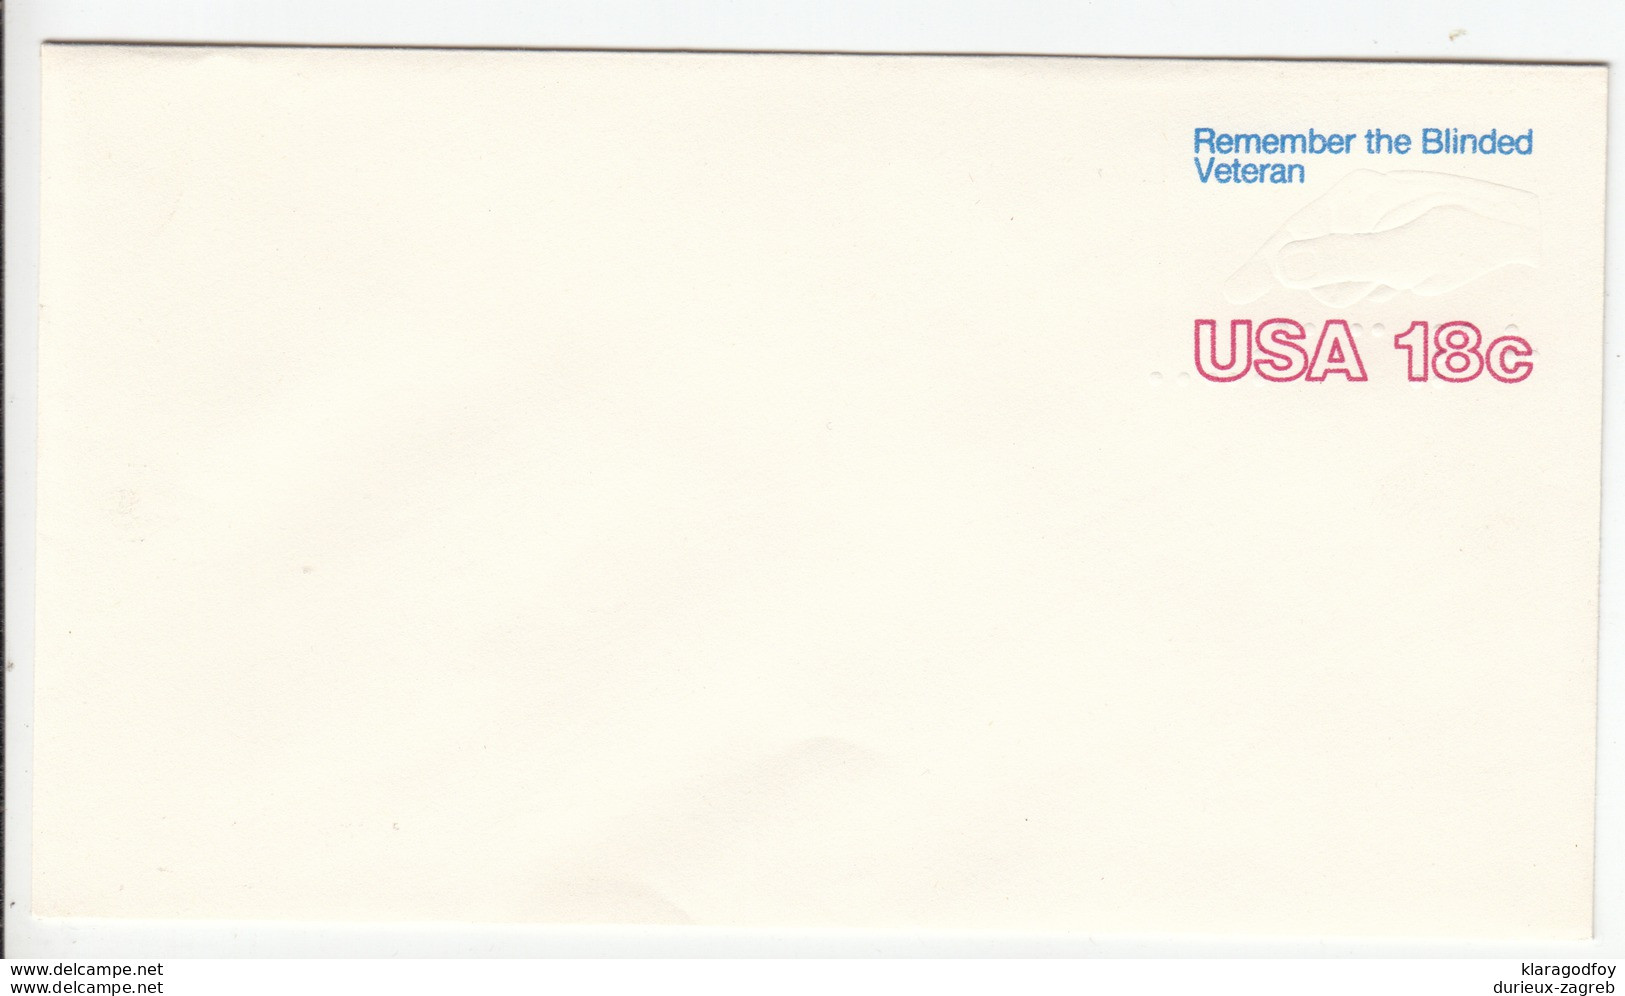 US Postal Stationery Stamped Envelope 1981 Hand And Braille Colorless Emossed U600 Bb161110 - 1981-00